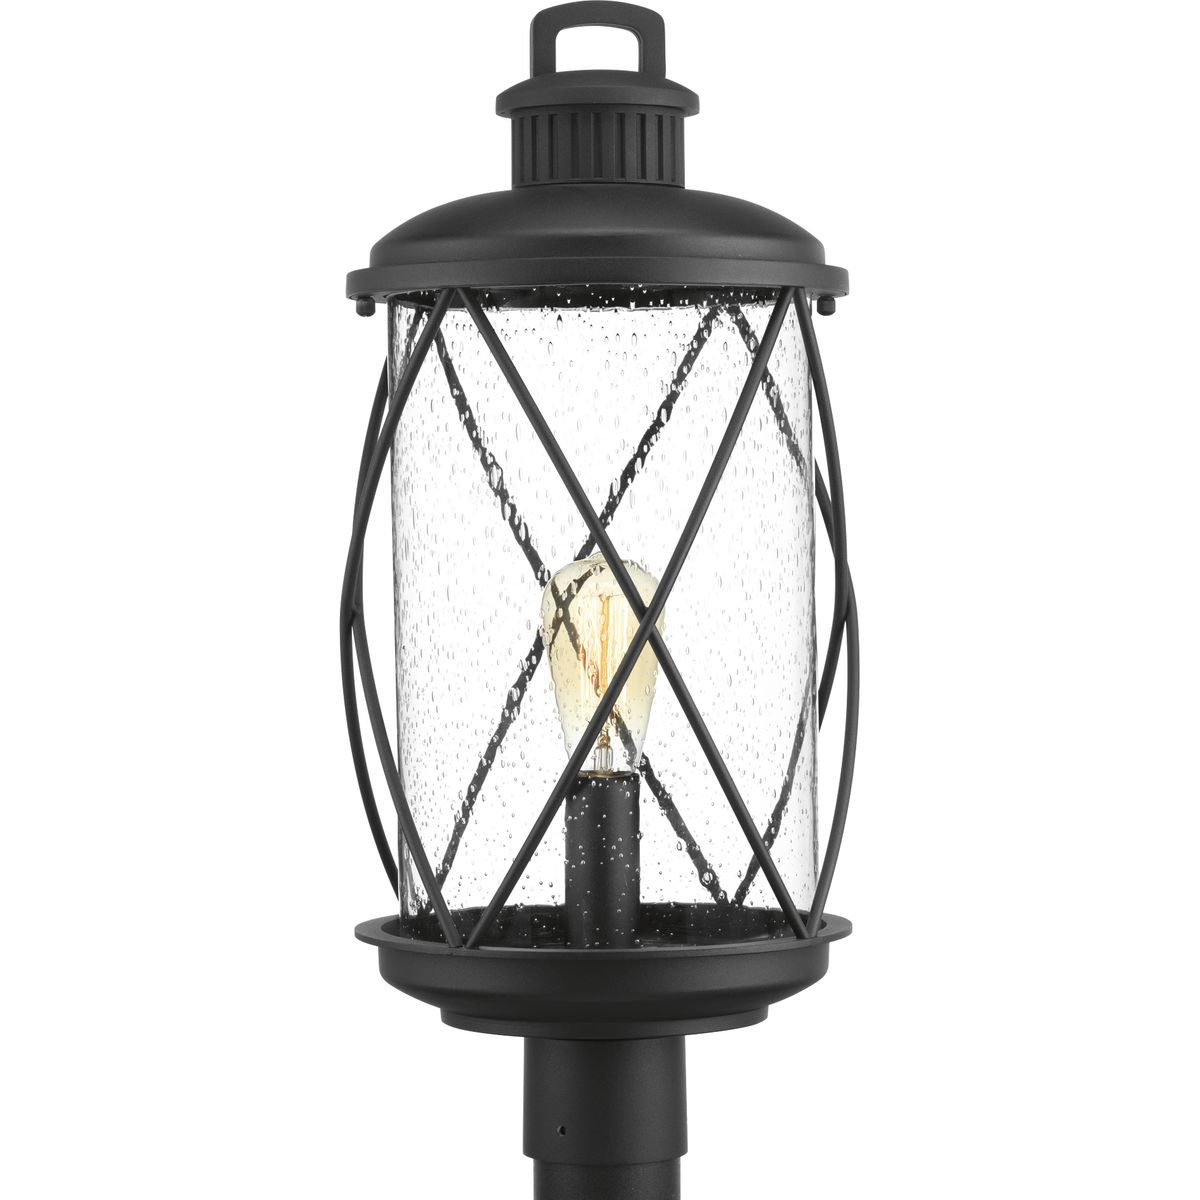 Hollingsworth post lantern features a crisscross design that surrounds clear seeded glass, emulating popular farmhouse decor. Ideal for a variety of transitional exteriors when paired with either vintage or traditional bulbs. Includes wall and hanging options.